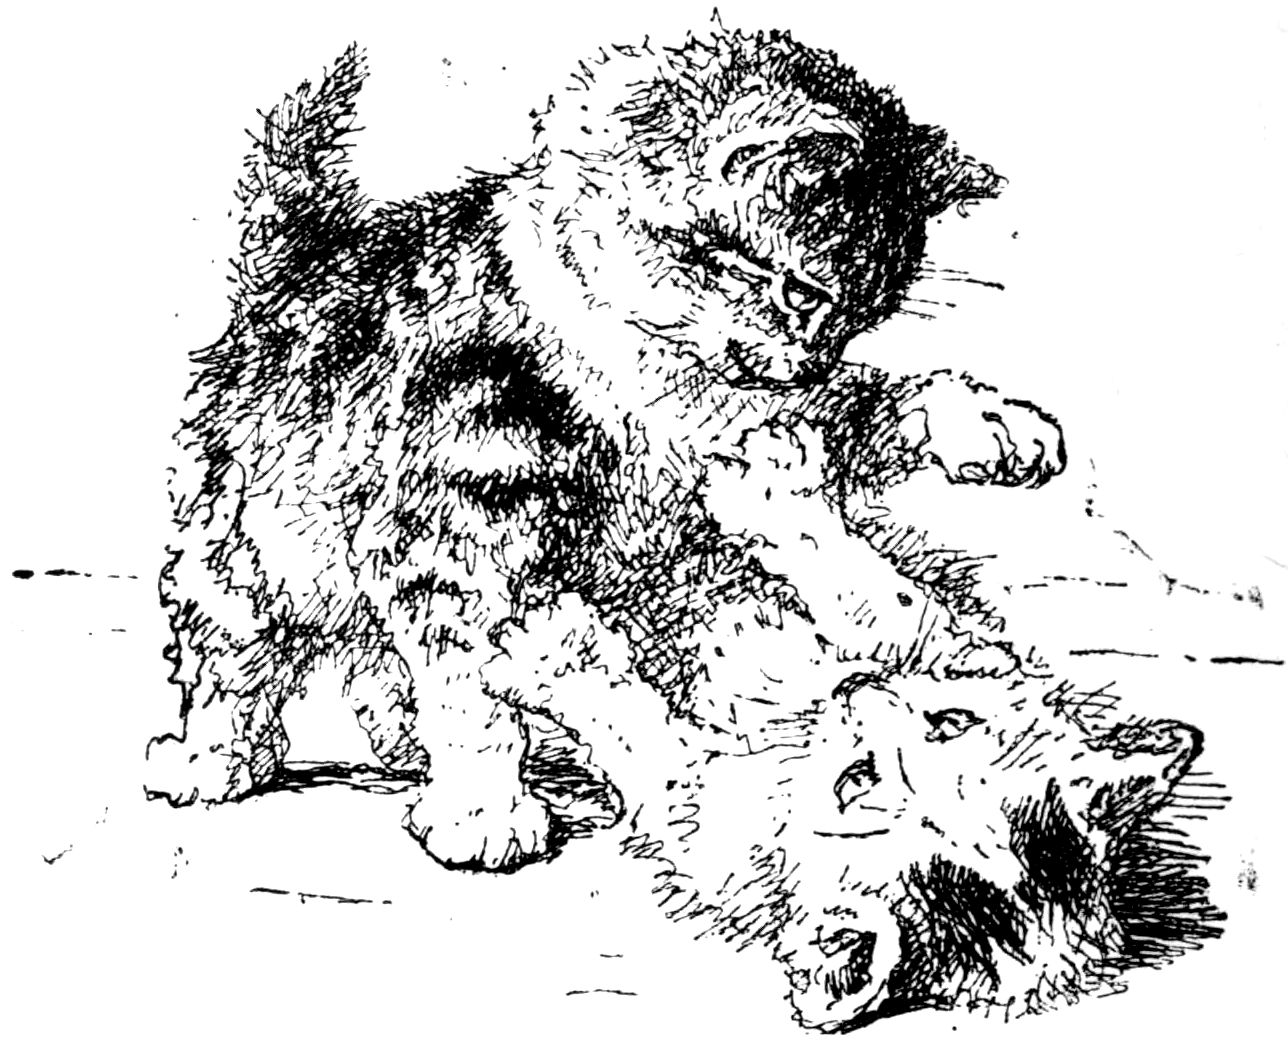 [Kittens by Madame Ronner]